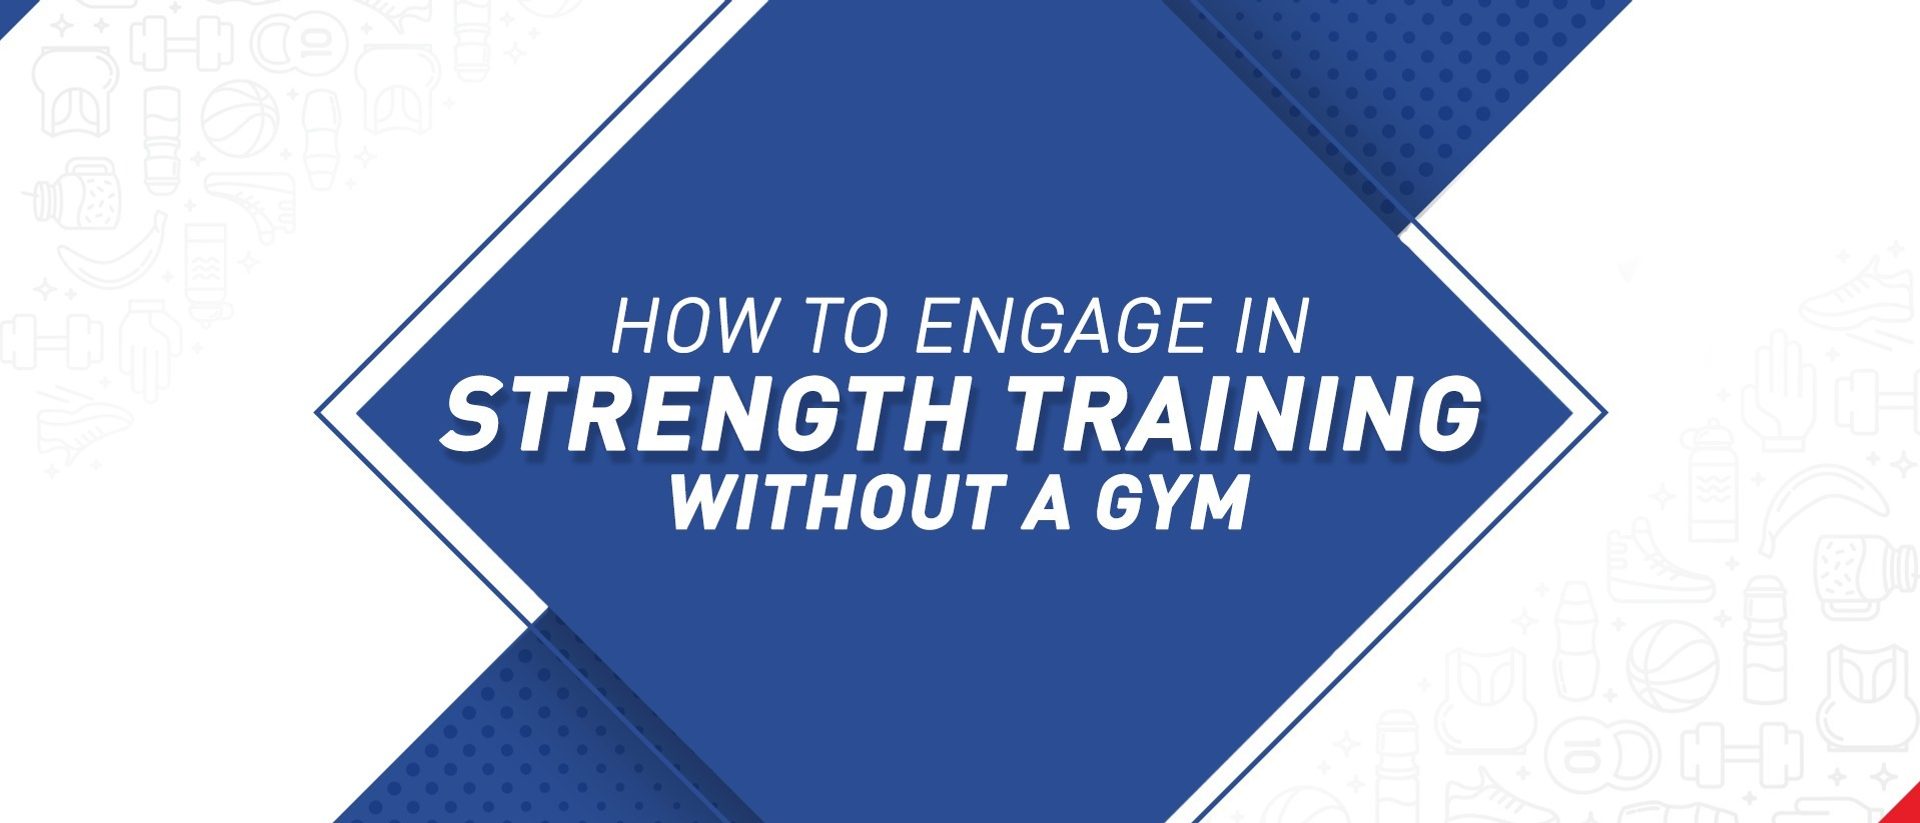 Strength training without a gym